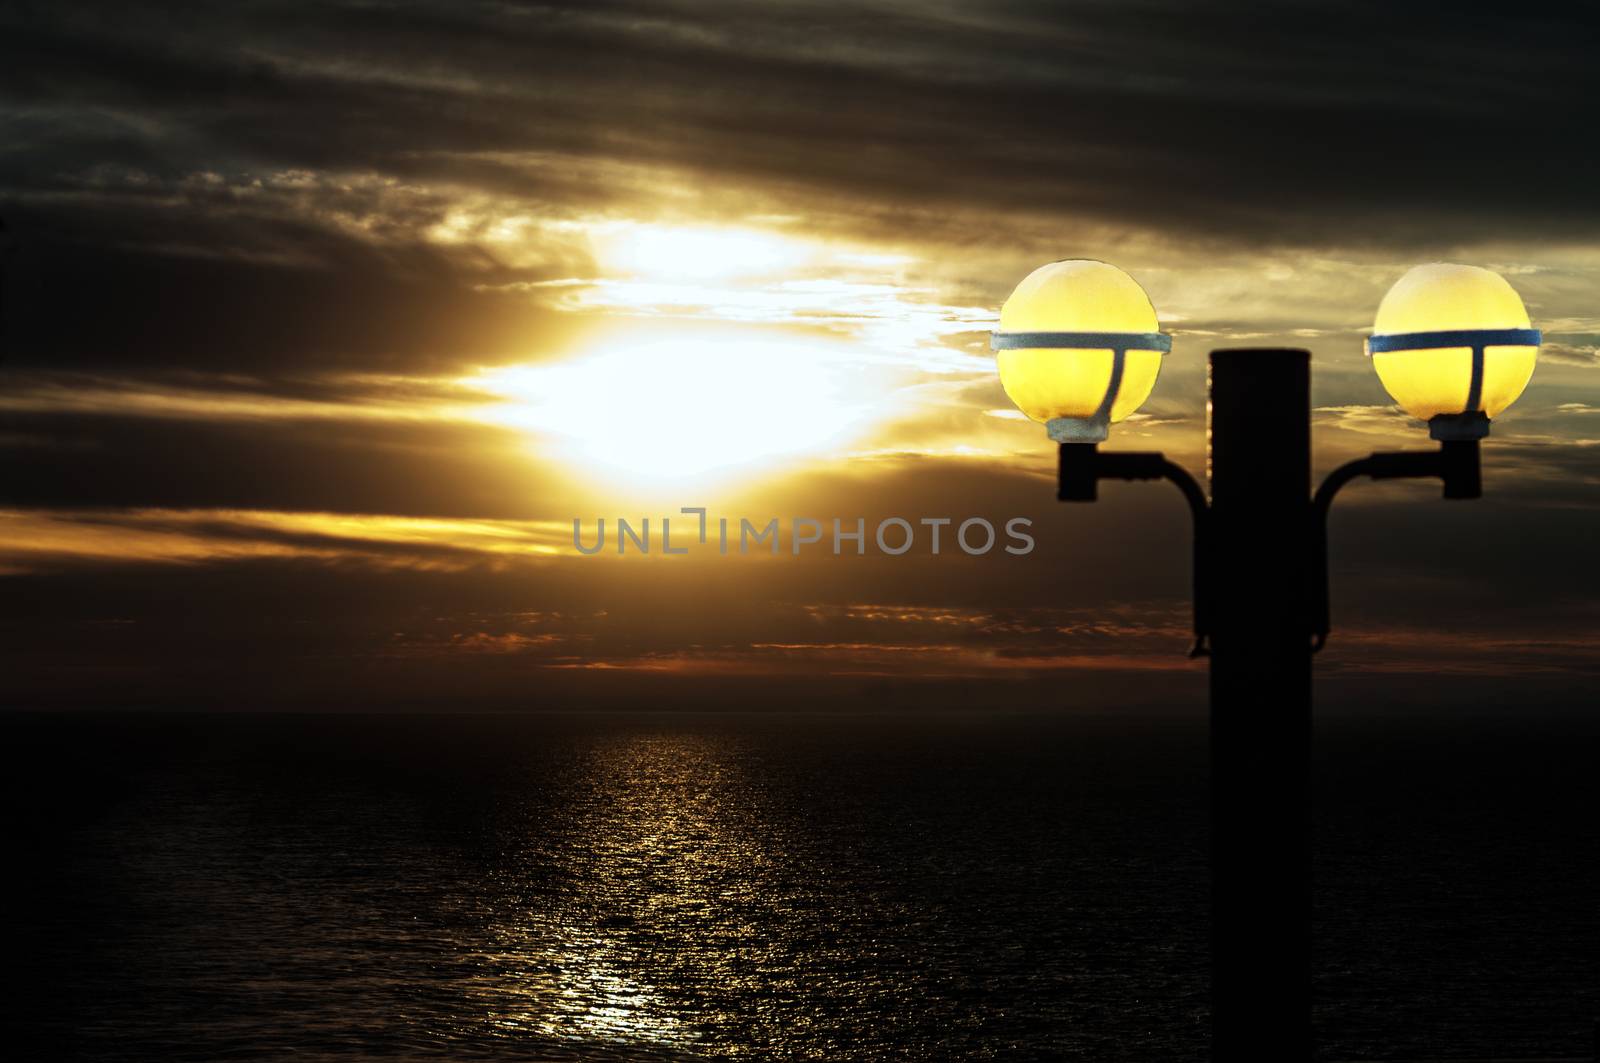 Sunset from the Deck of a Cruise Ship by edcorey